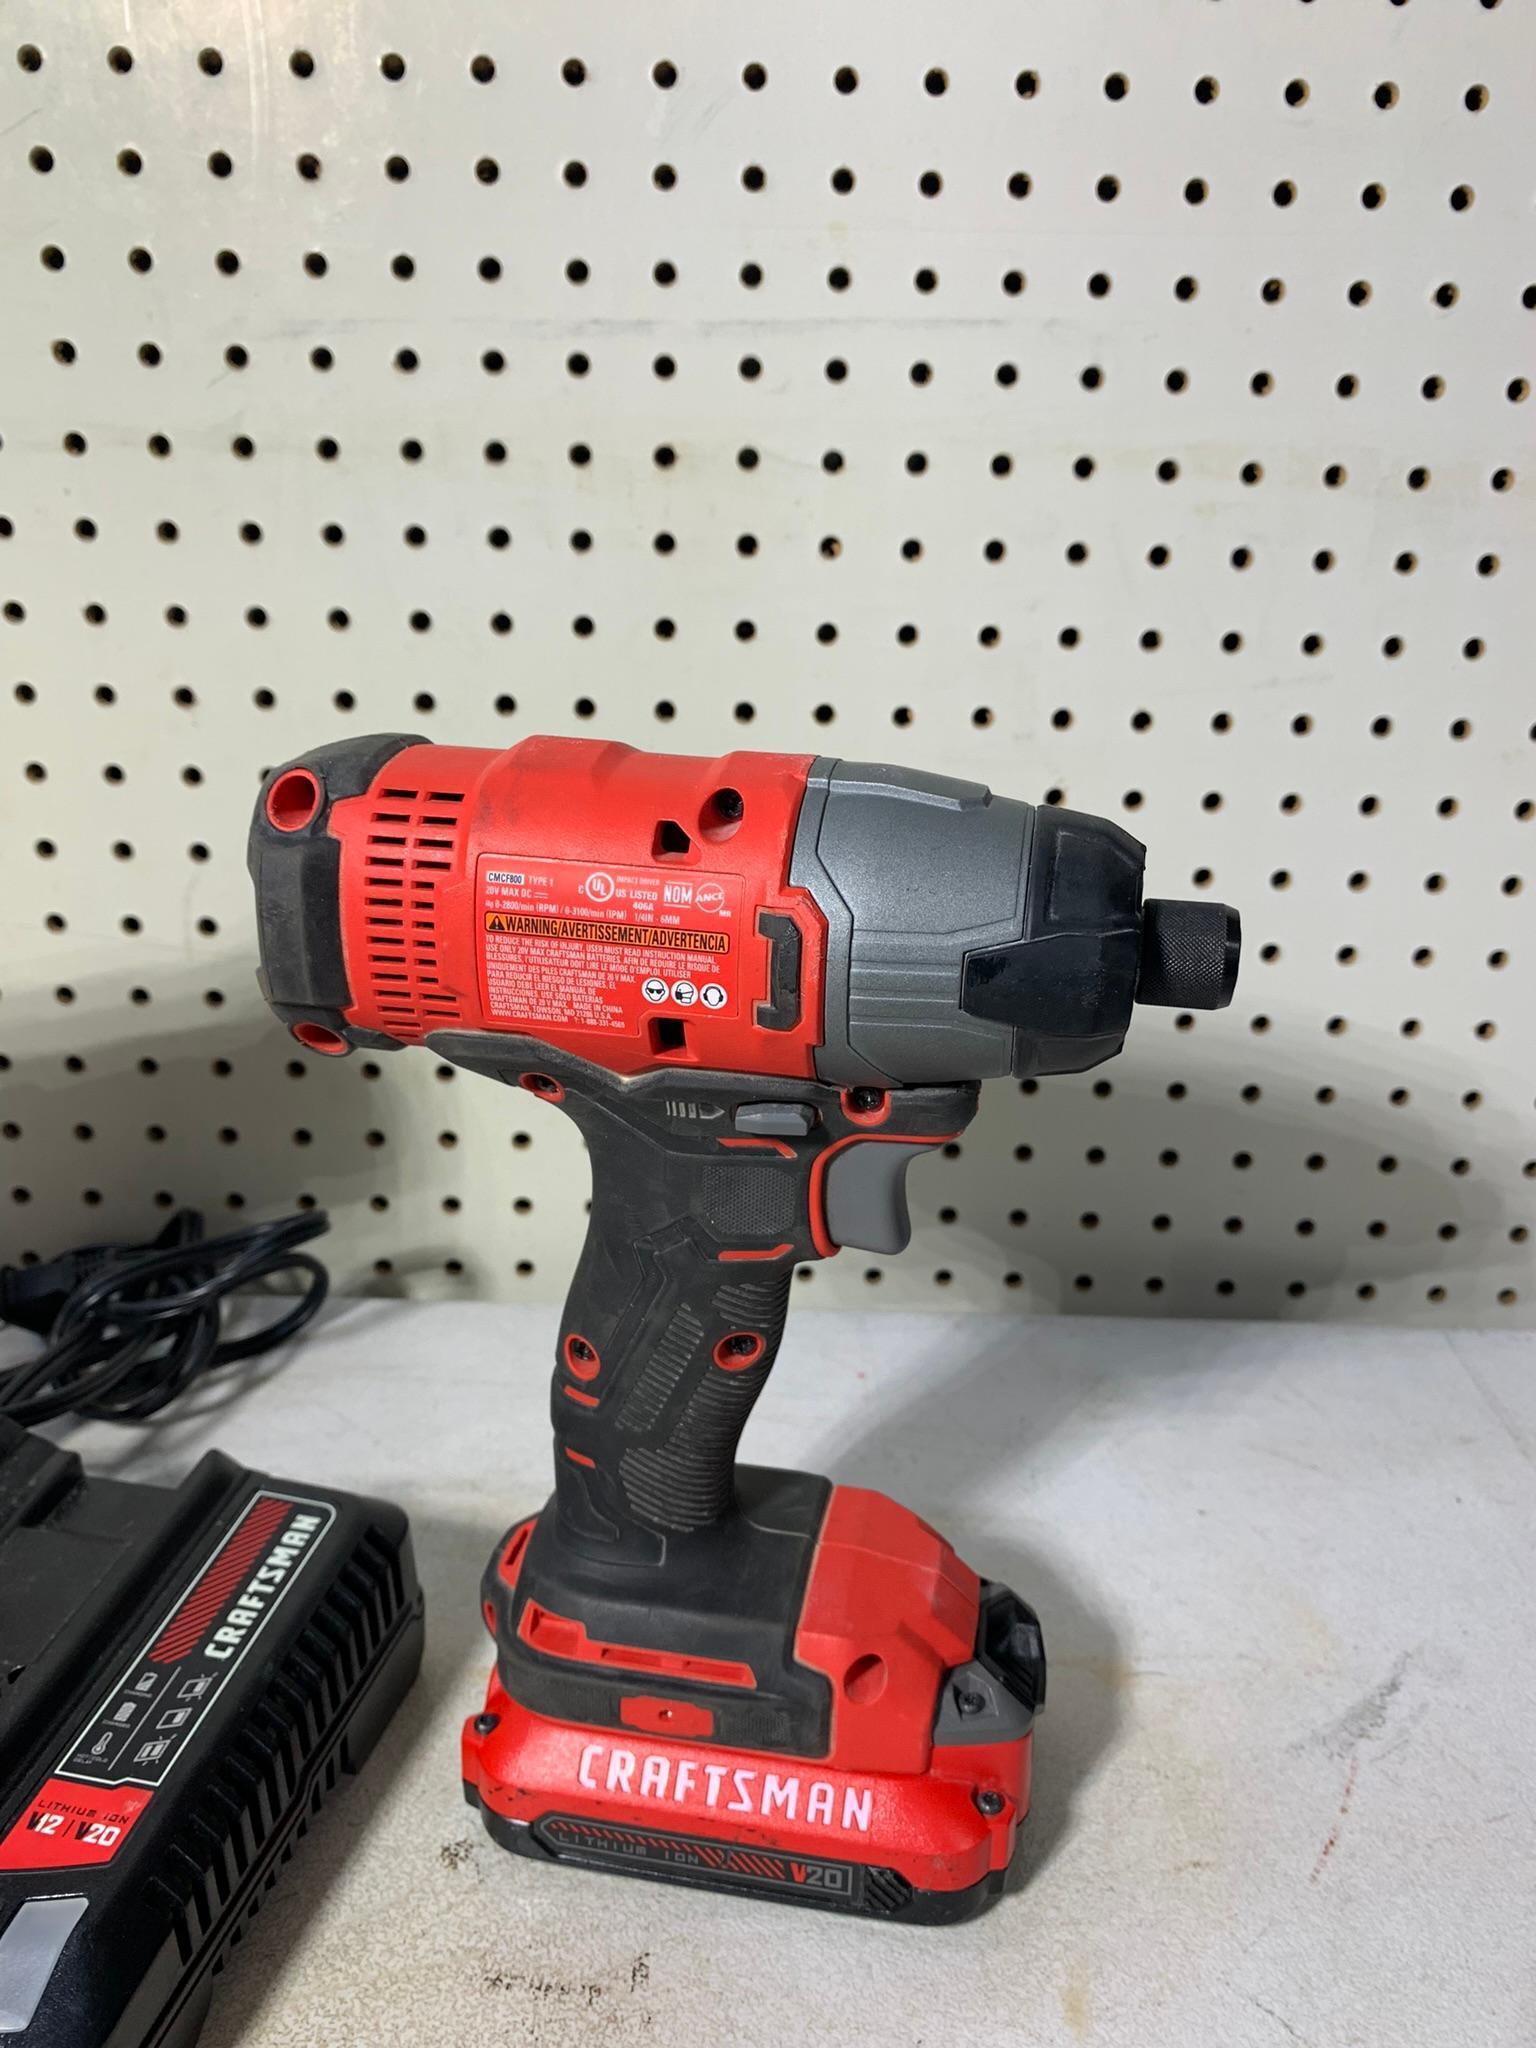 Craftsman Drill / Driver, Charger and 2 Batteries